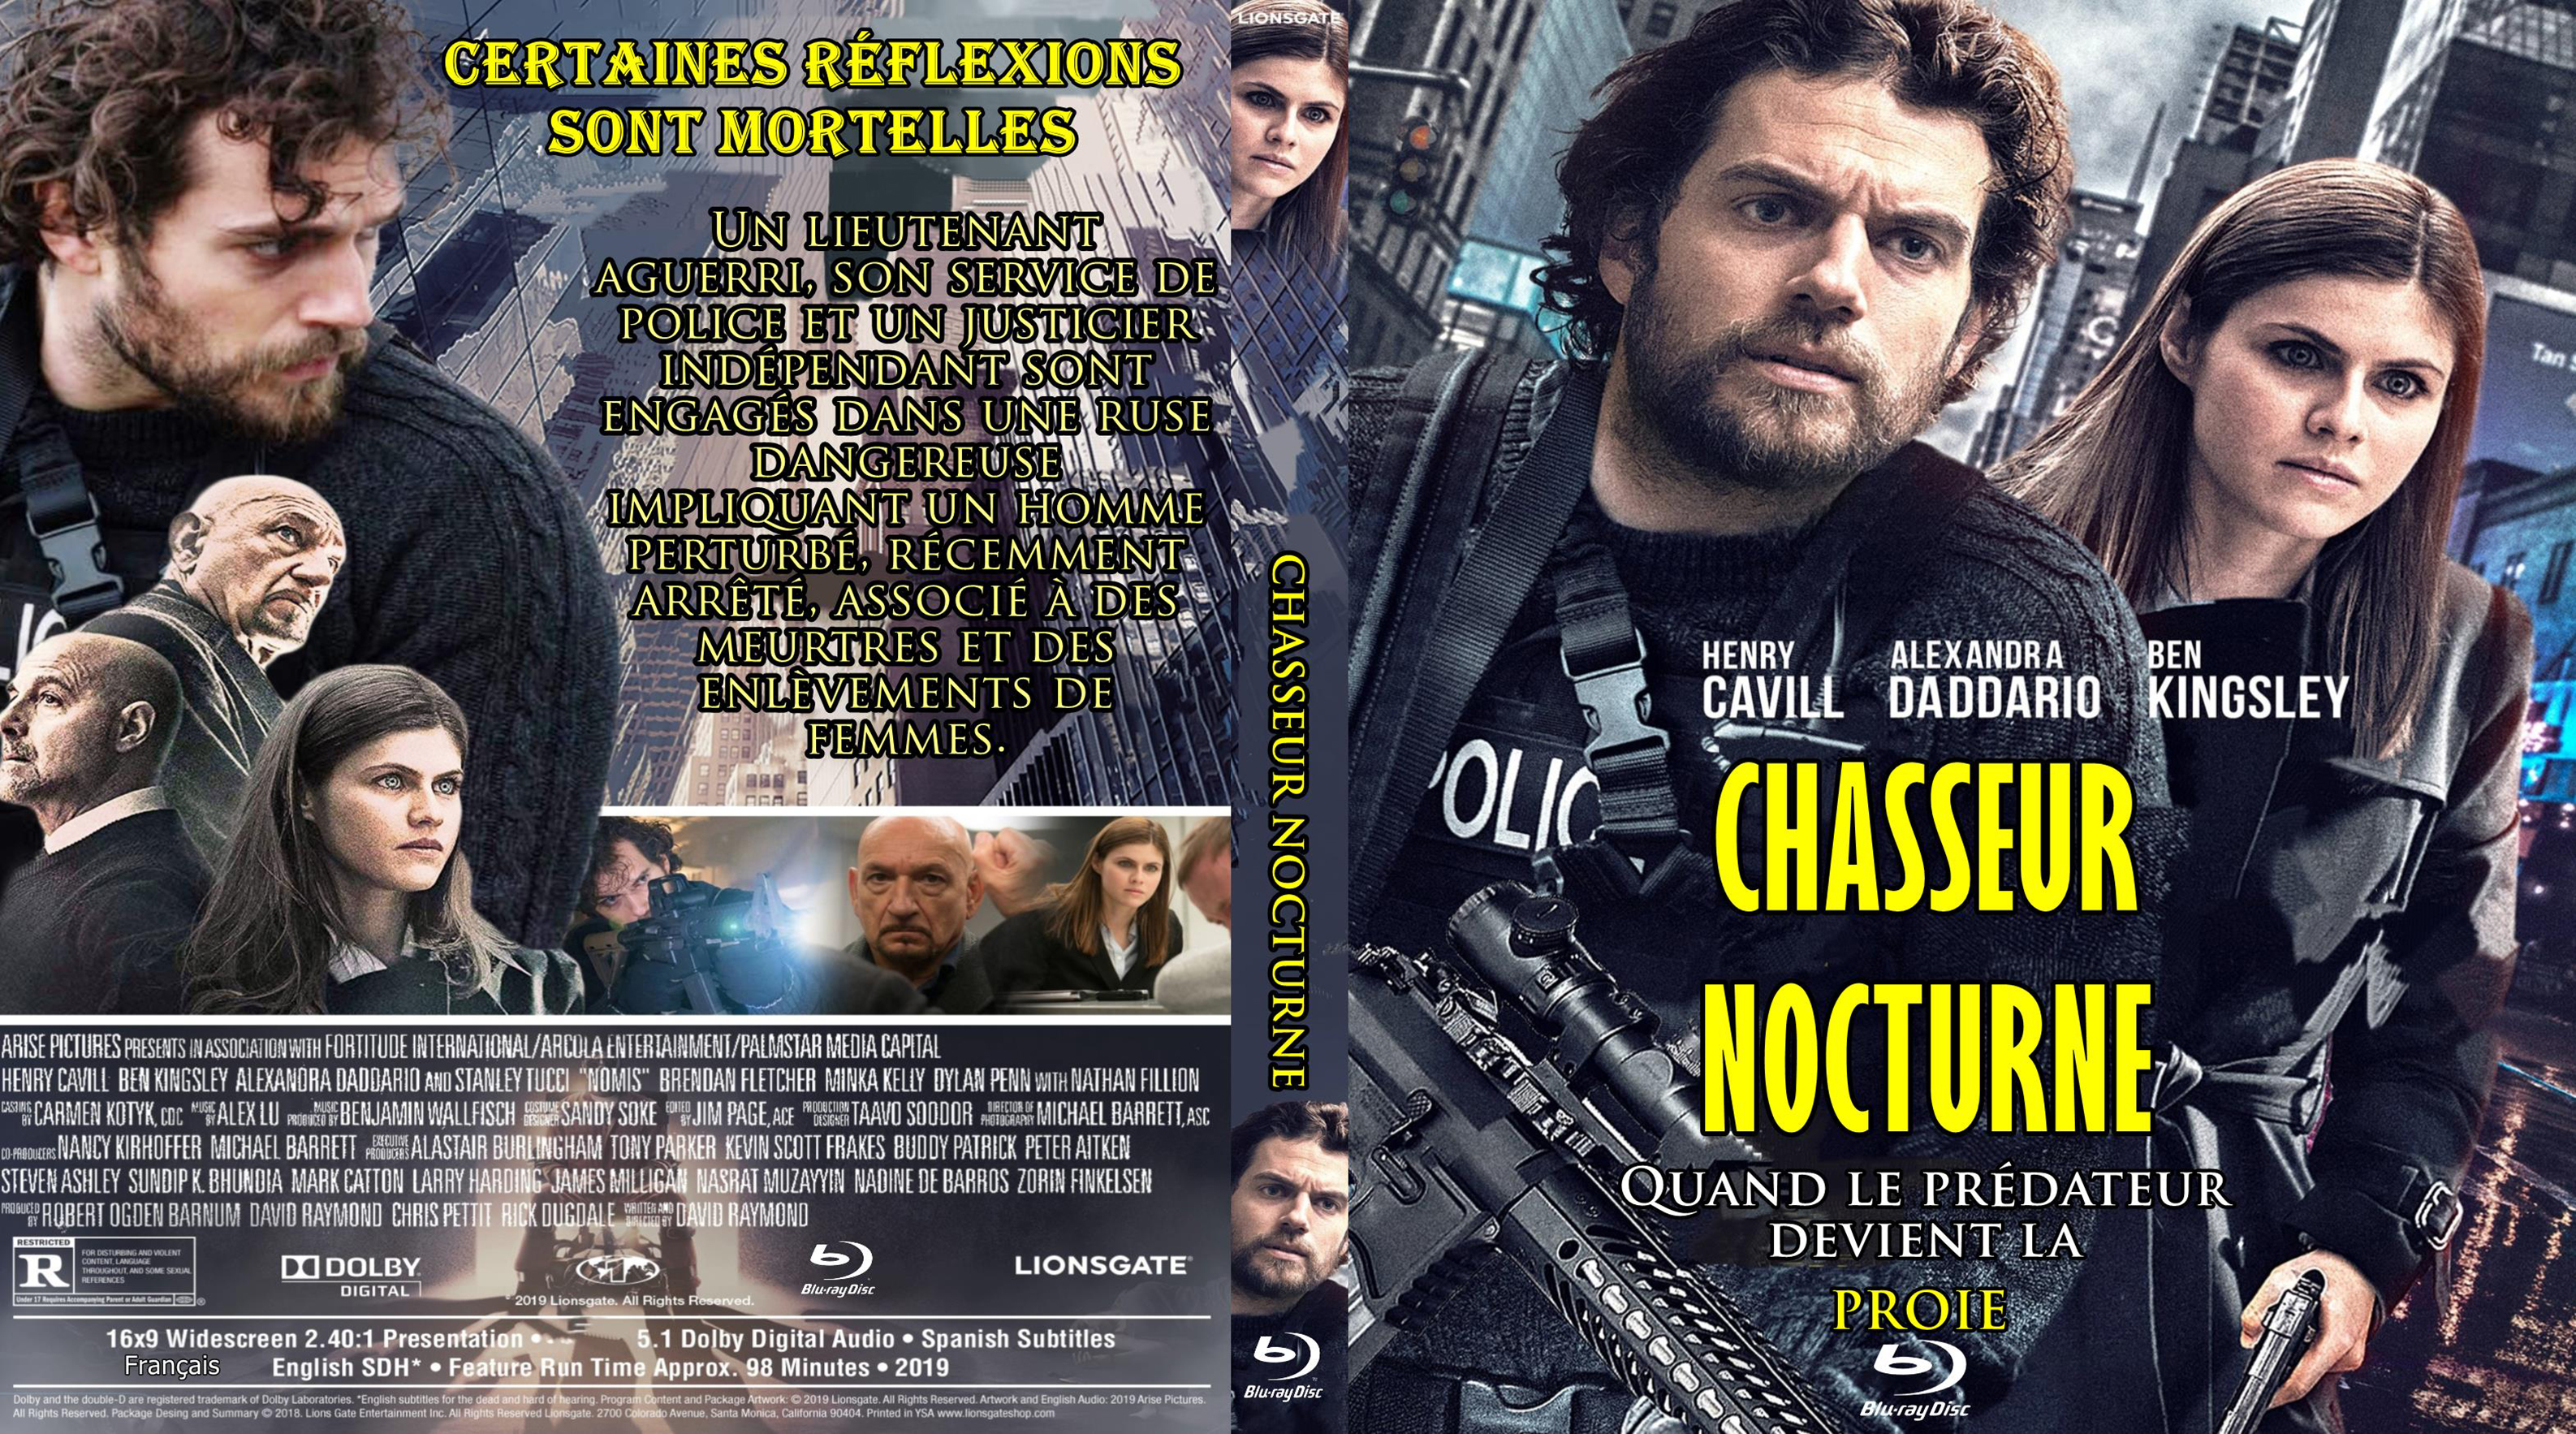 Jaquette DVD Chasseur nocturne custom (BLU-RAY)